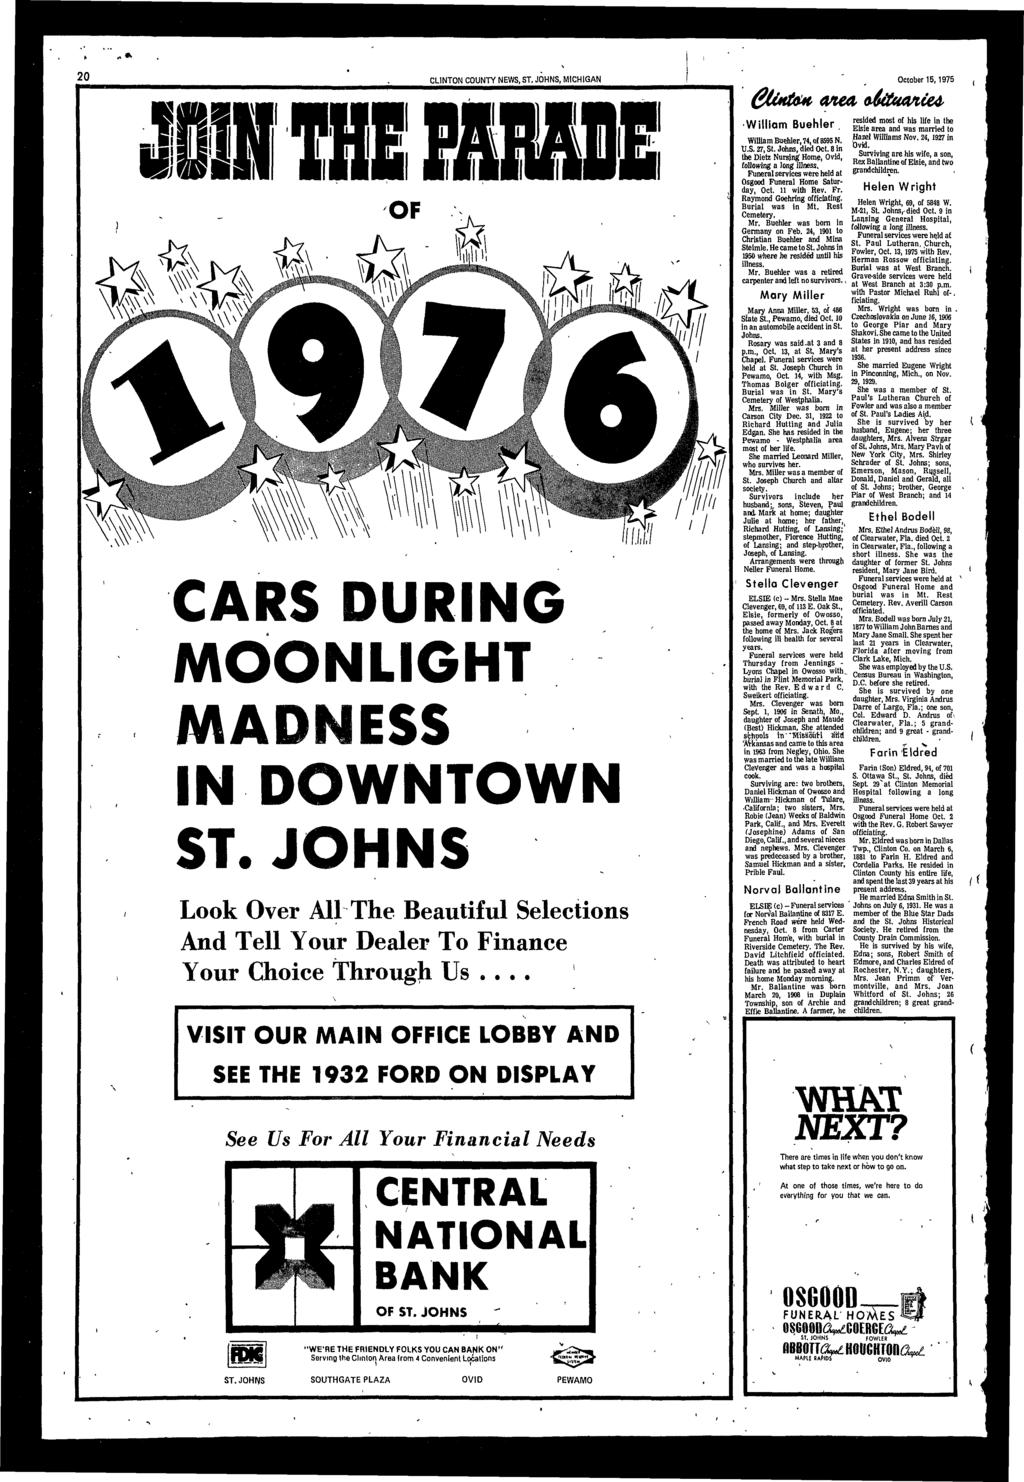 20 CLINTON COUNTY NEWS, ST, JOHNS, MICHIGAN October 15,1975 \ CARS DURING MOONLIGHT MADNESS IN DOWNTOWN Look Over All The Beautful Selectons And Tell Your Dealer To Fnance Your Choce Through Us.